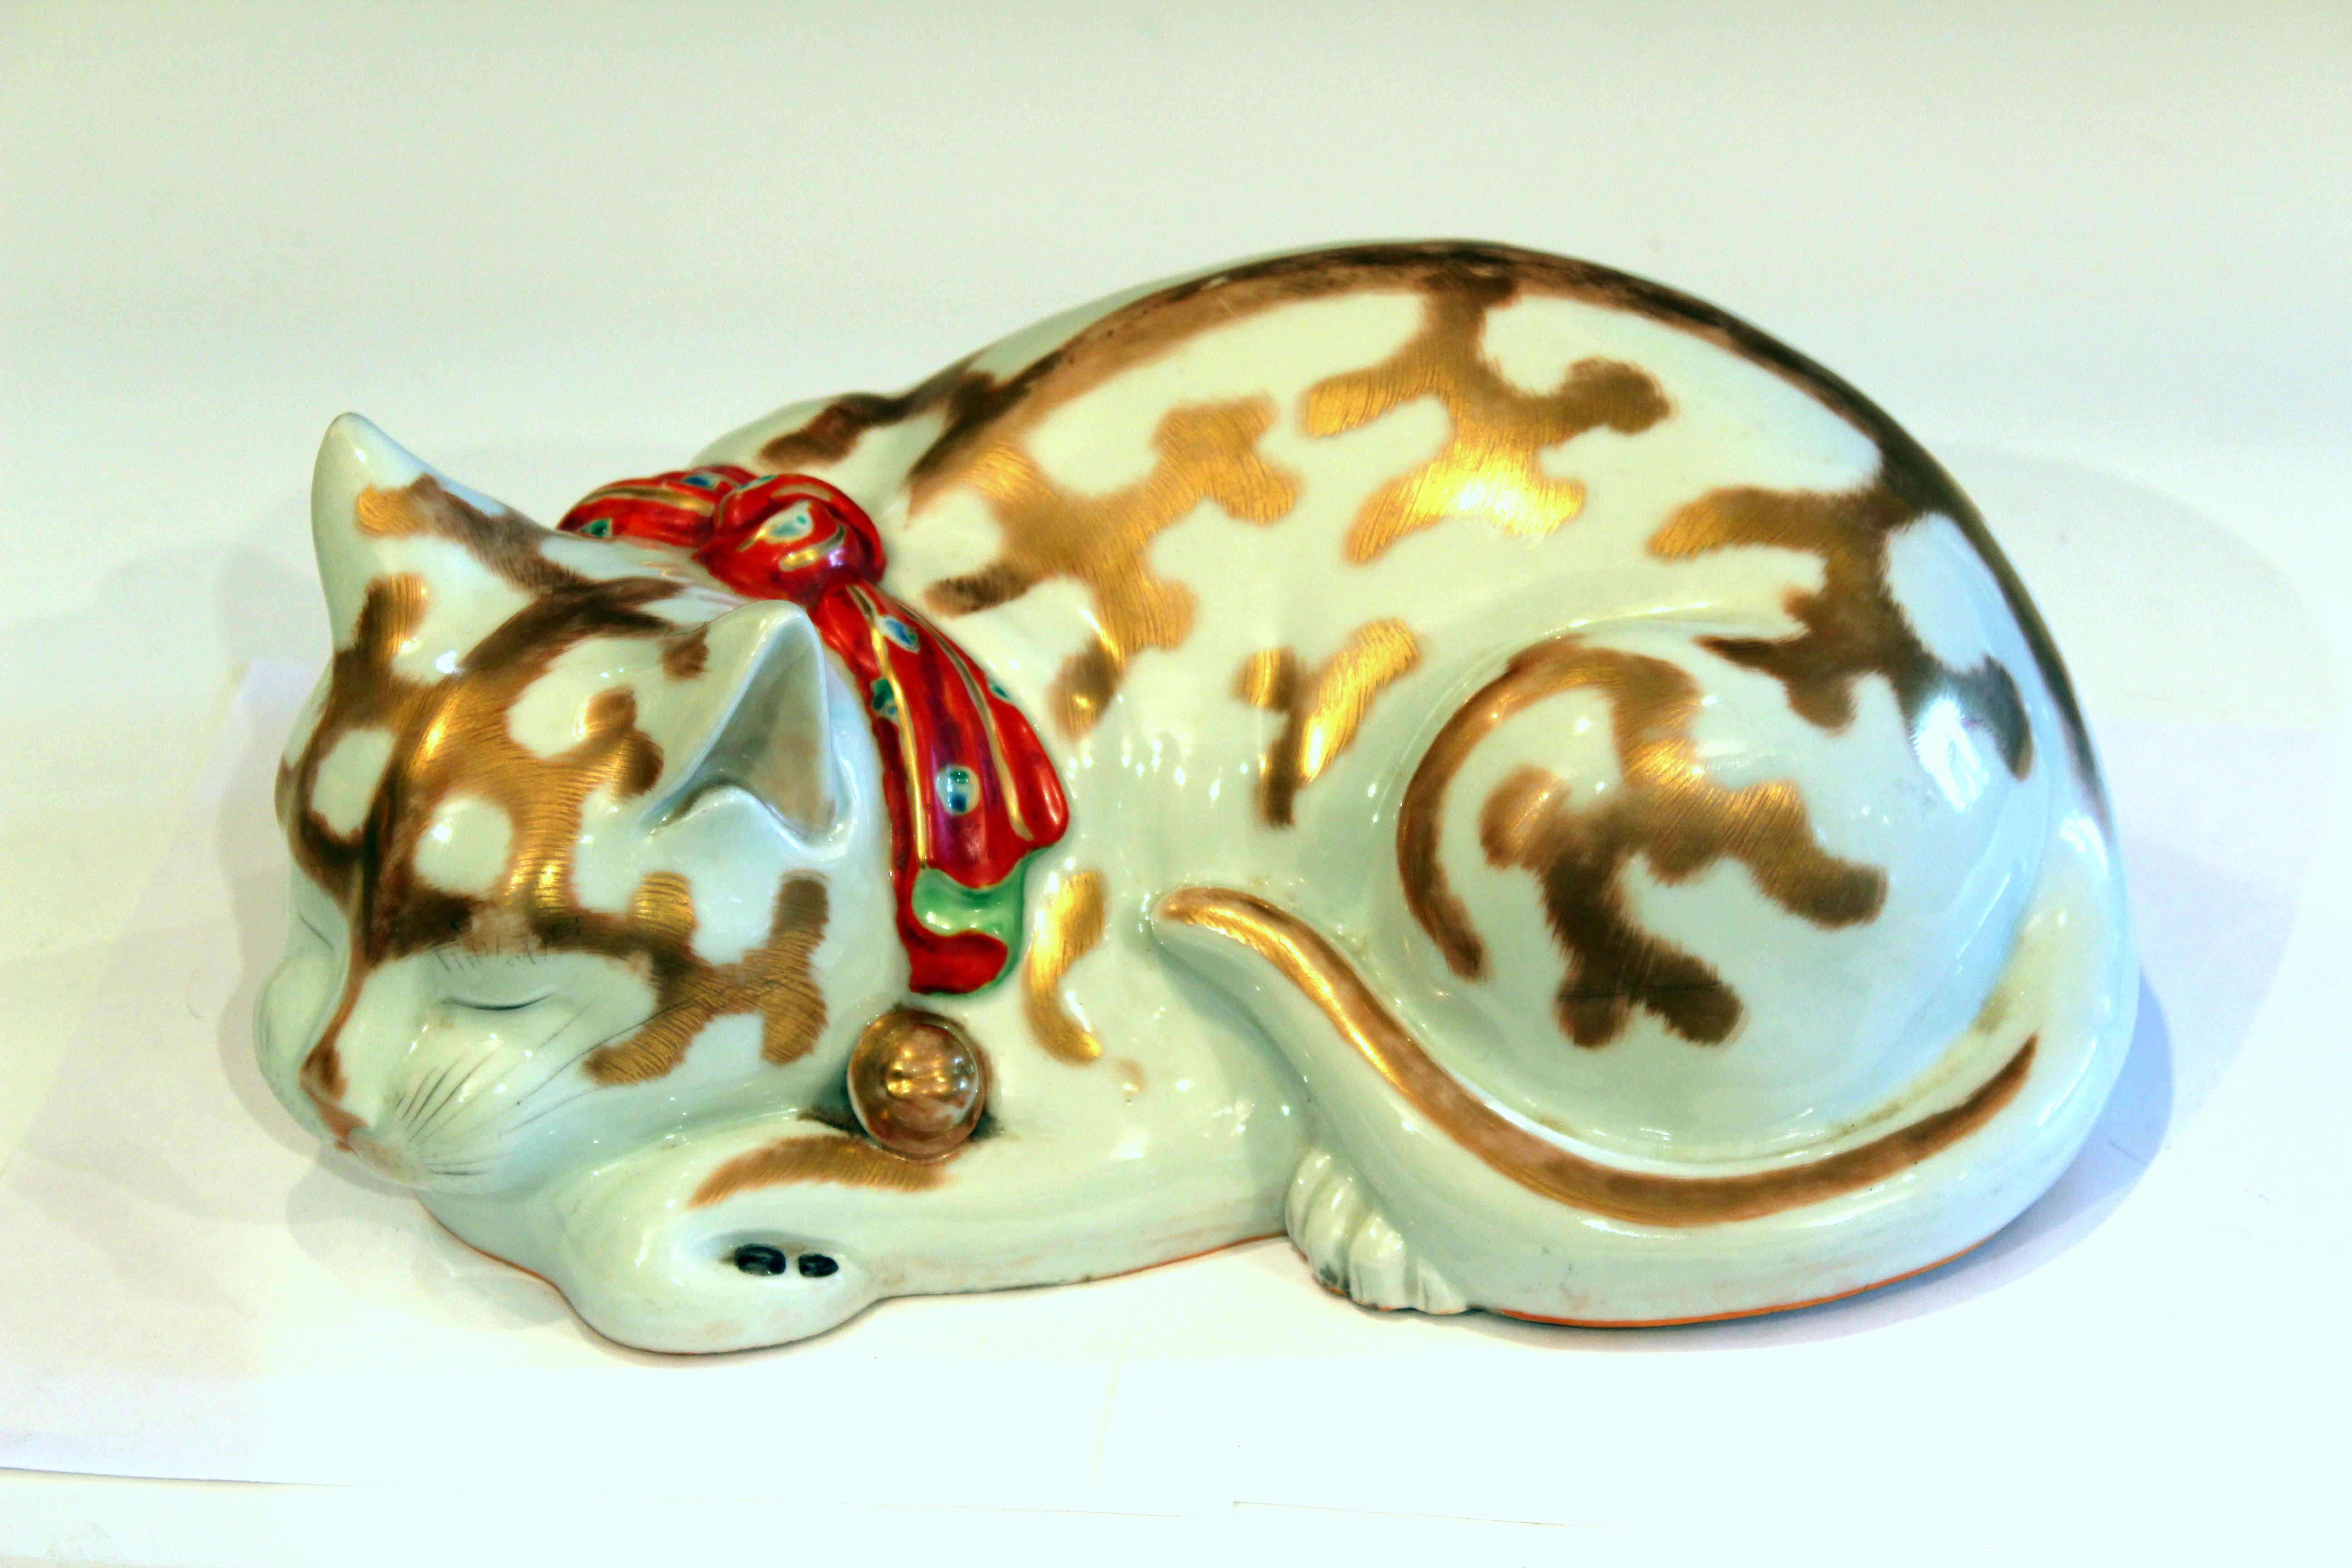 Japanese Kutani porcelain cat figure peacefully curled in sleep with finely painted detail, gilt highlights, and bright red bow, circa 1920s. Large life like size. Export stamp on base. Measures: 13